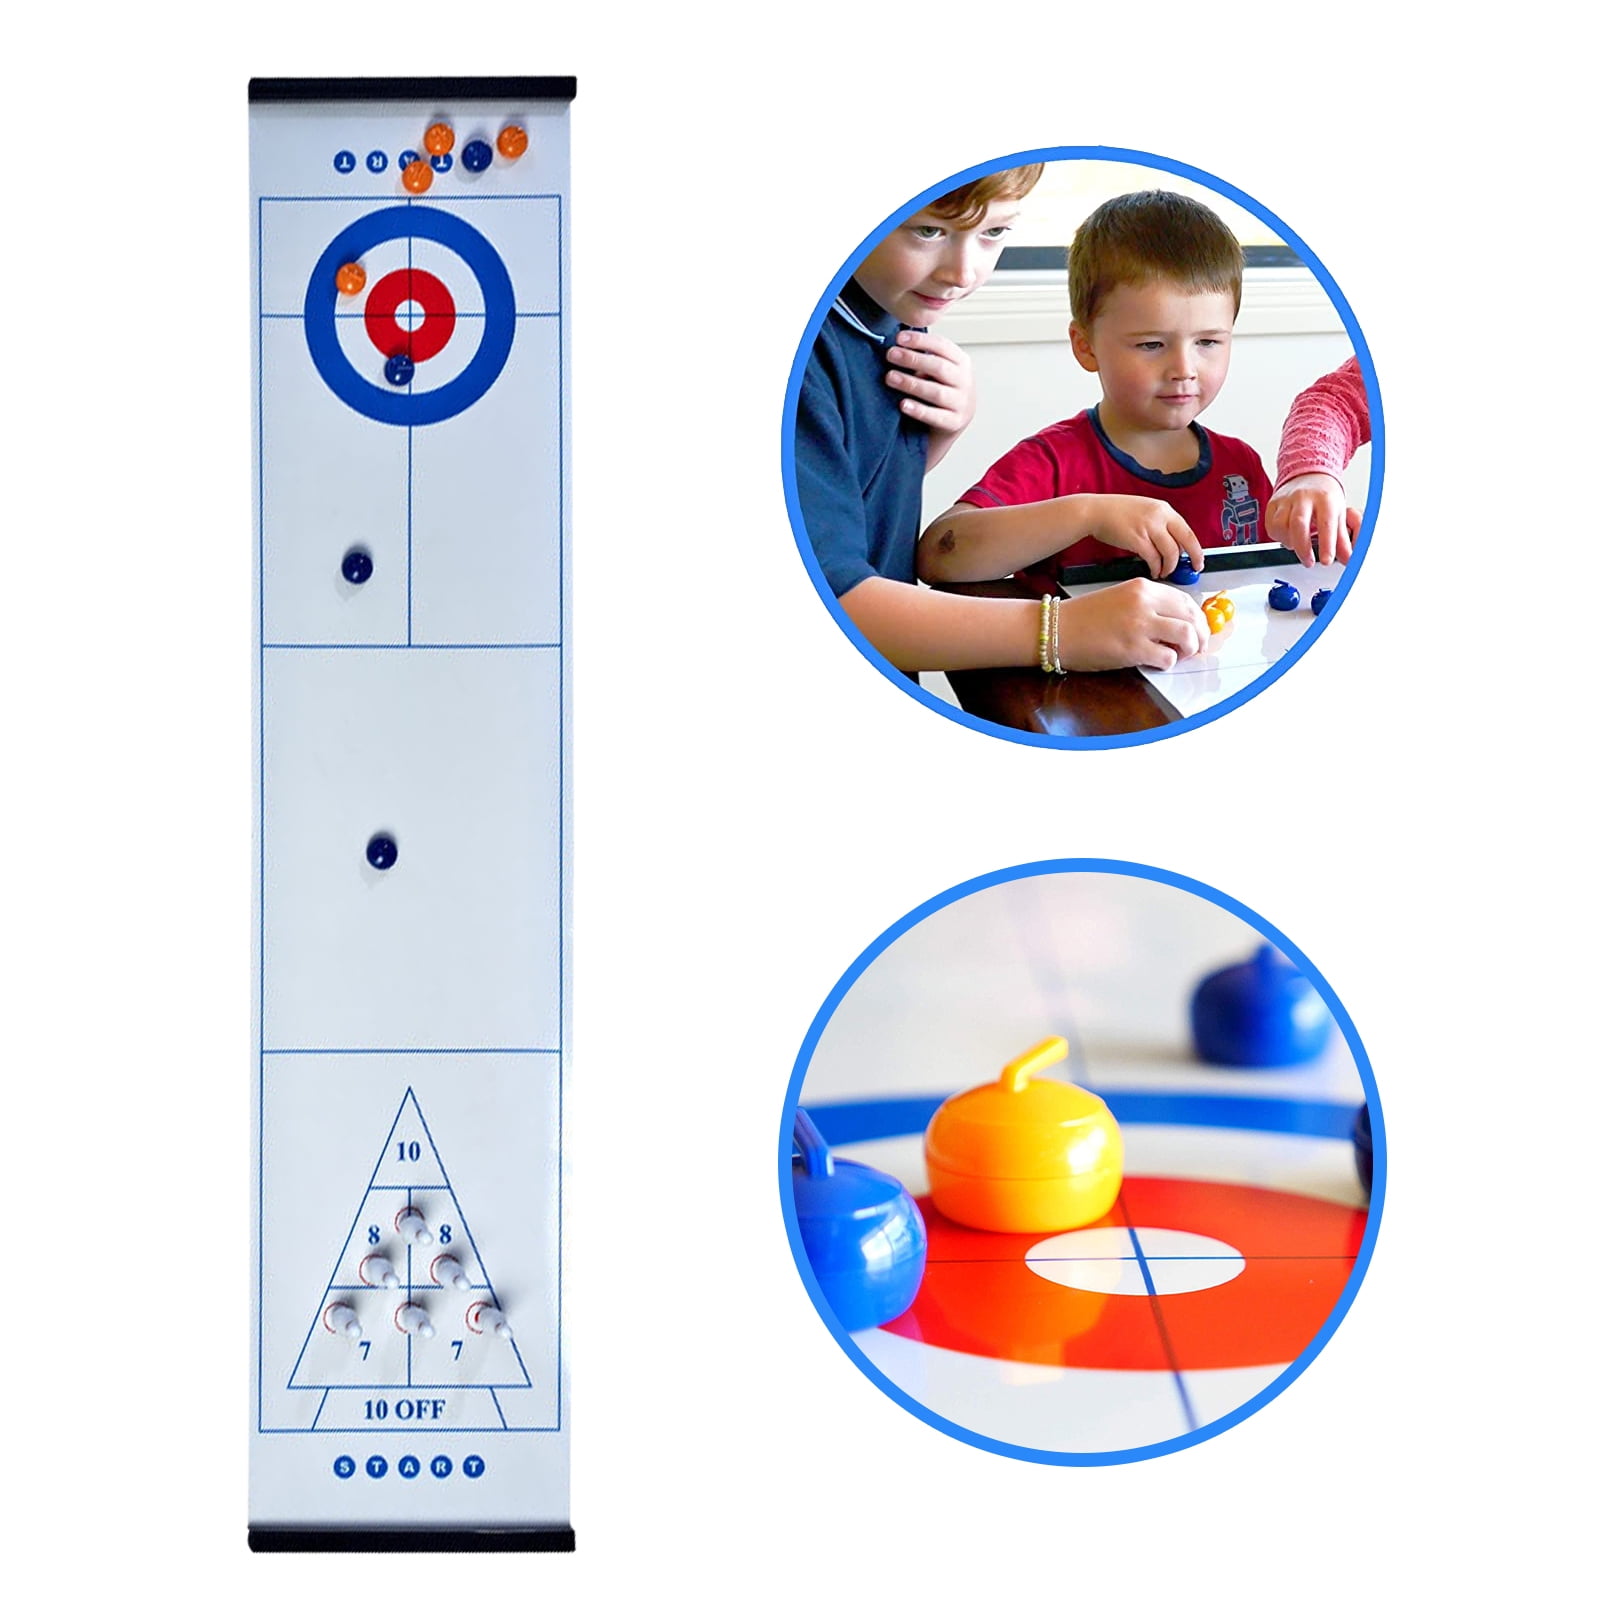 Curling Game and Bowling Set Portable Family Games for Home& School &Travel N/Q 3 in 1Table Top Shuffleboard Compact Curling Game for Storage Gift for Child Age 6 and Up 